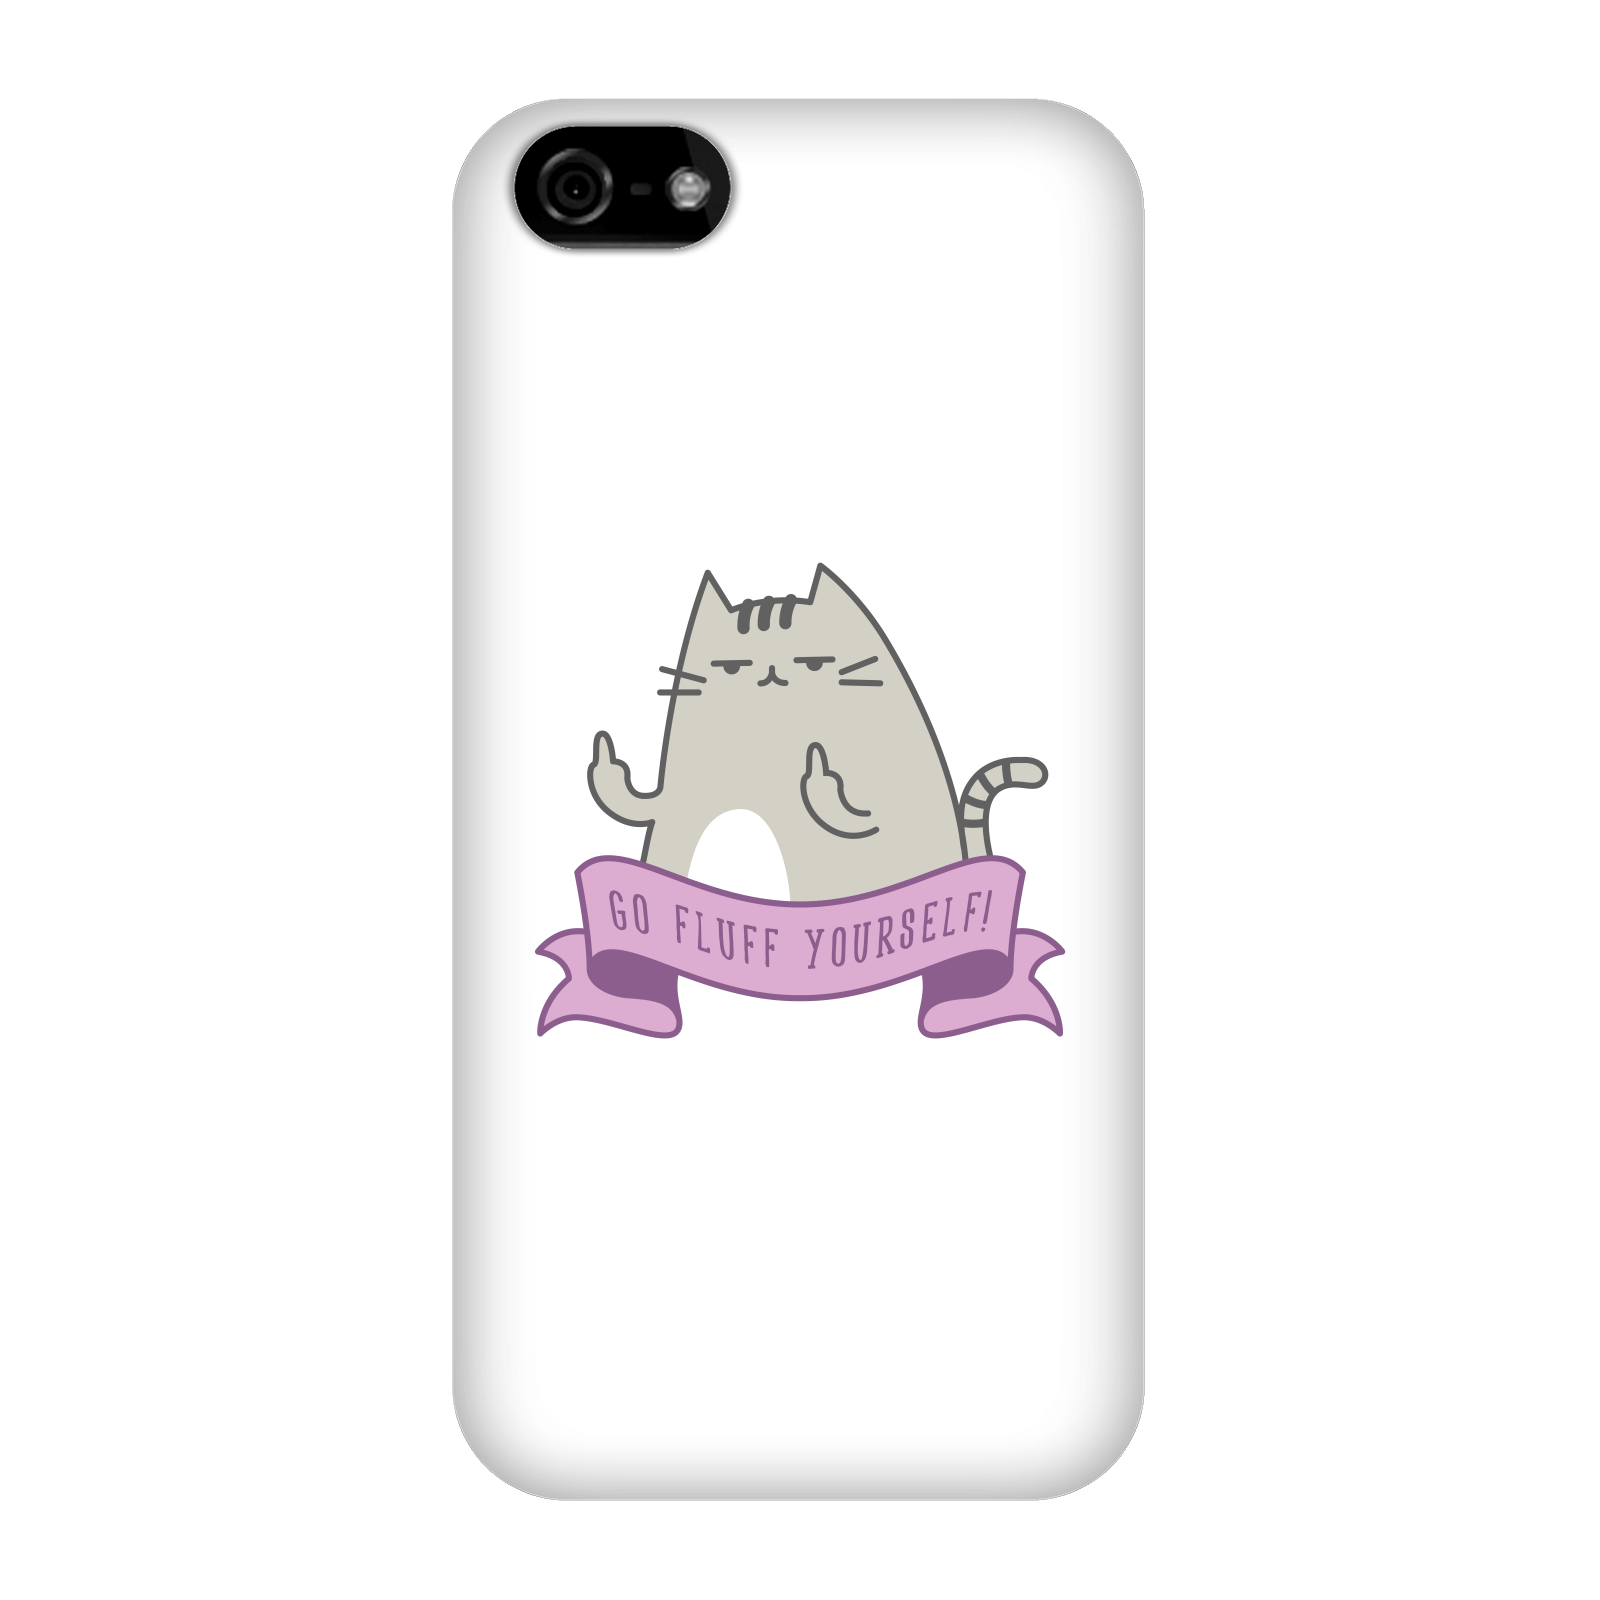 Go Fluff Yourself! Phone Case for iPhone and Android - iPhone 5C - Snap Case - Matte